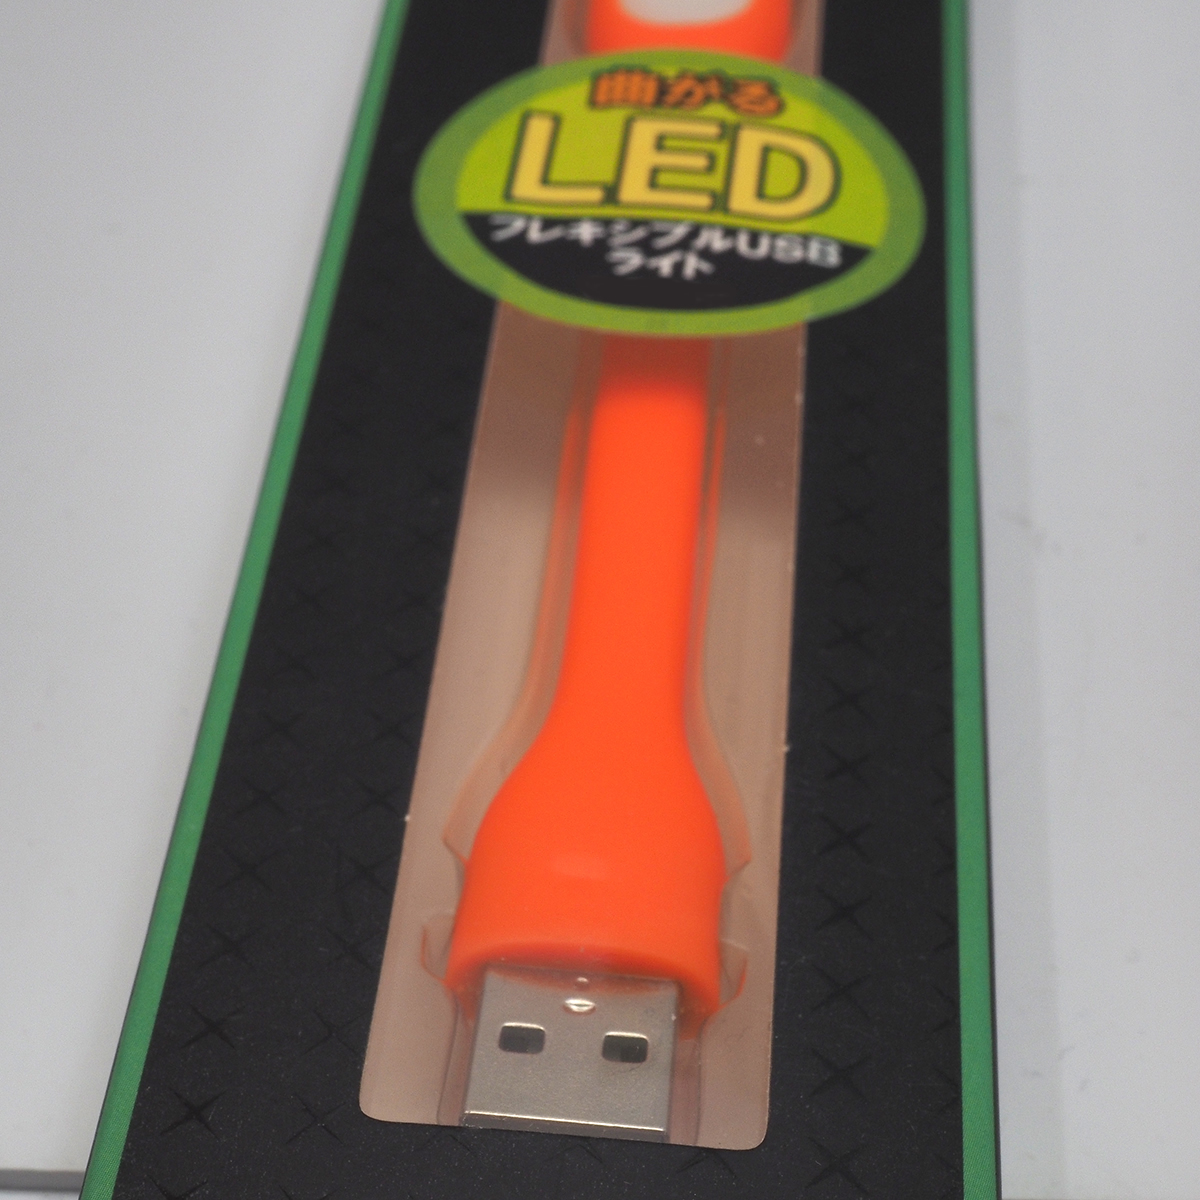  turns microminiature light weight LED light flexible USB light LXS-001 orange USB port . exist personal computer & mobile battery correspondence unopened goods 